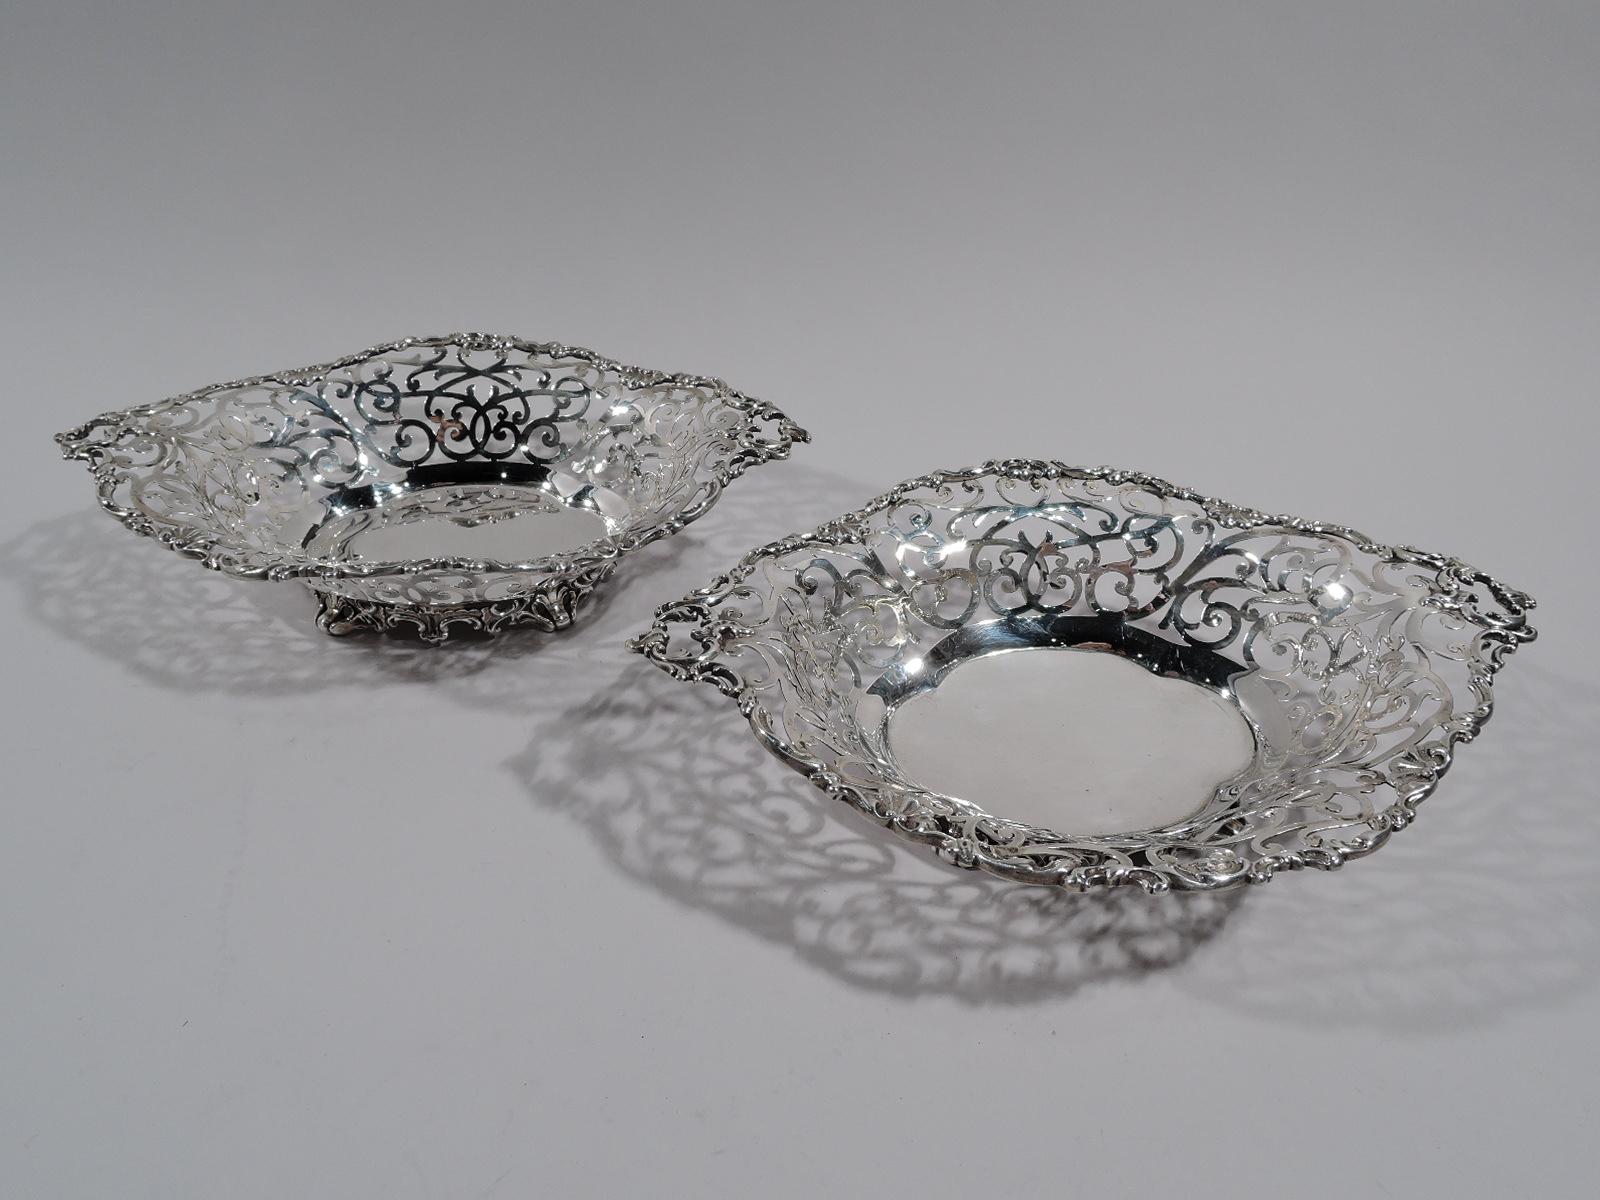 Pair of Edwardian sterling silver bowls. Made by Howard in New York in 1895. Each: Solid quatrefoil well sides have open scrolls and tendrils. Rim has applied scrolls and open end-handles. Scrolled foot ring. Fully marked including maker’s stamp and